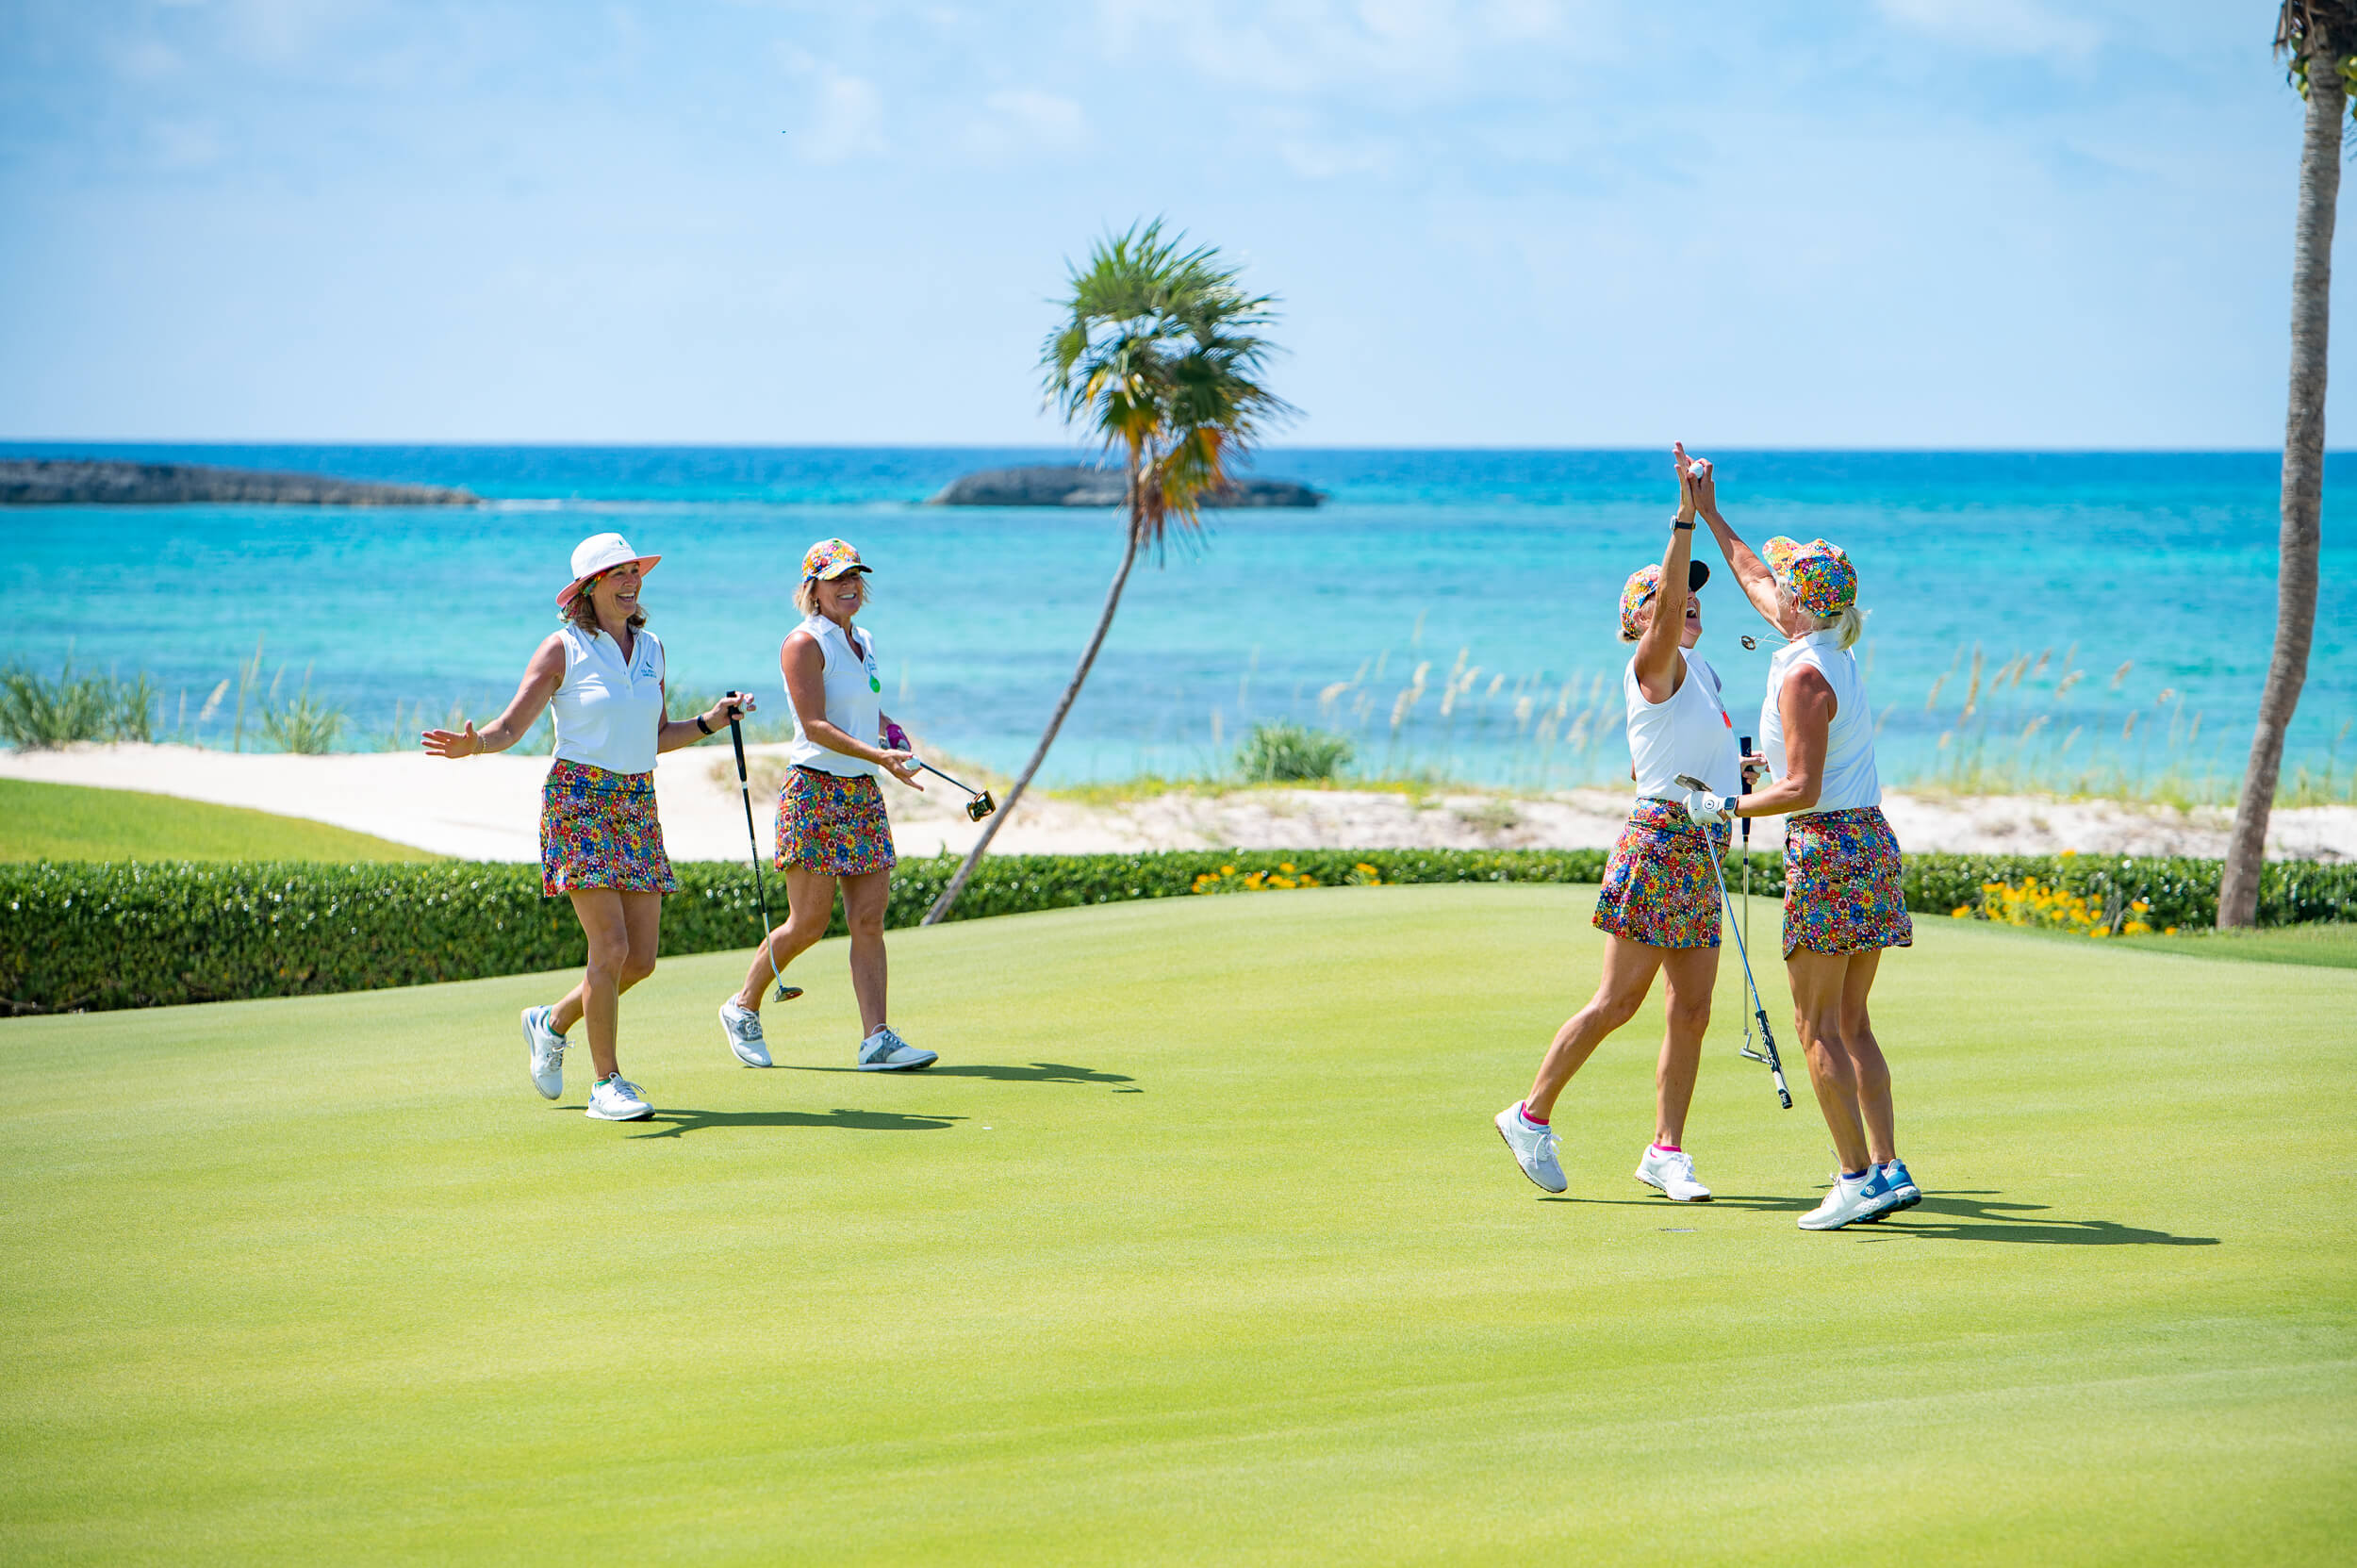 Women golfers practicing golf at The Abaco Club Golf course